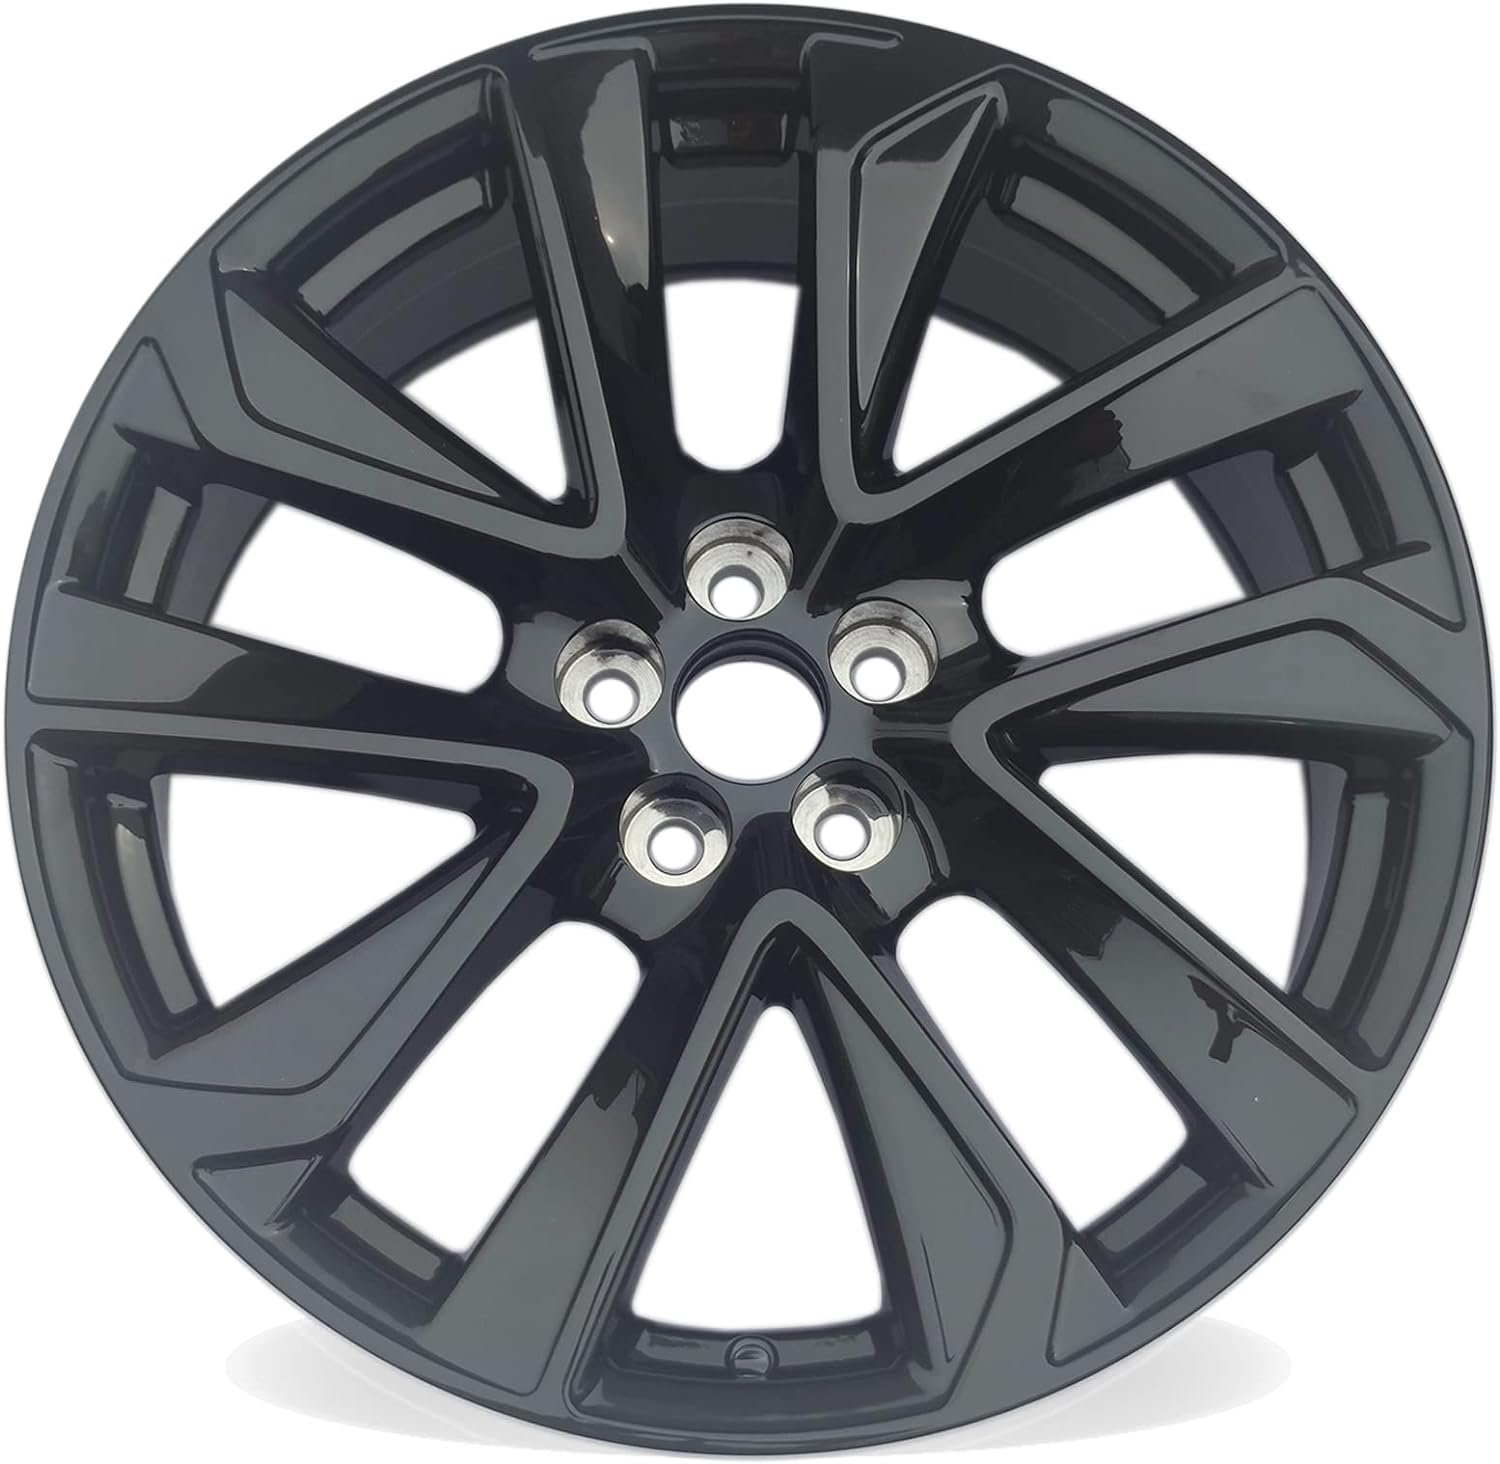 18×8 All Black Alloy Wheel Review